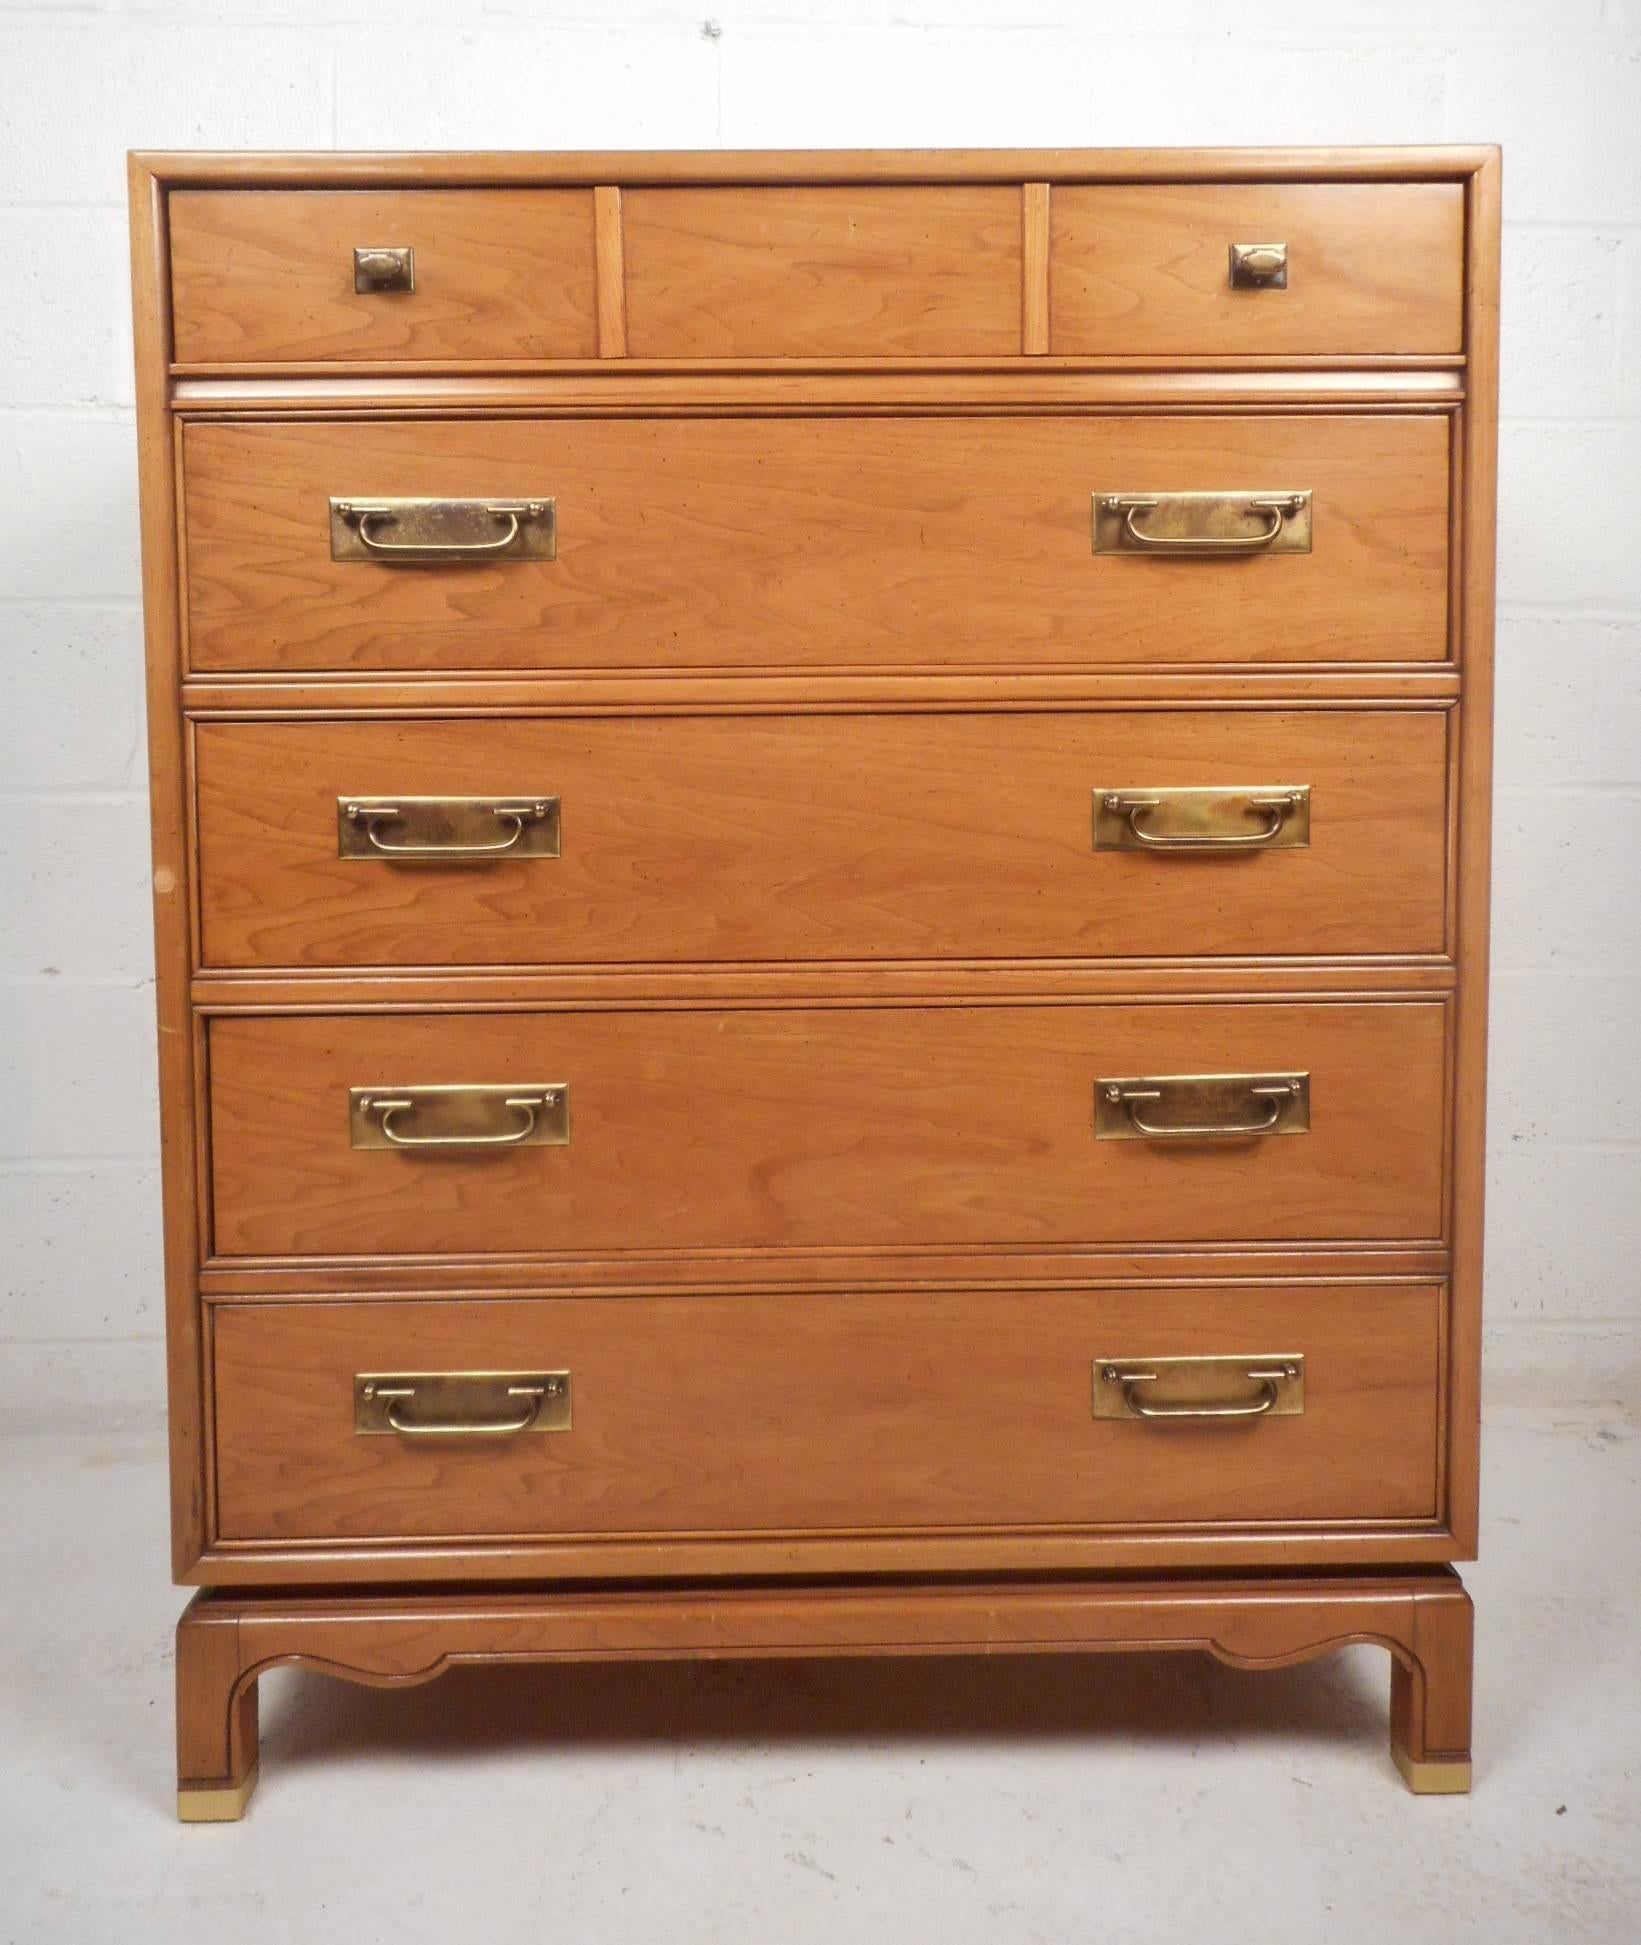 This elegant vintage modern gentleman's chest features five hefty drawers with various brass pulls ensuring plenty of room for storage. Elegant light walnut wood grain and a unique sculpted base adds to the Mid-Century appeal. Sturdy and sleek